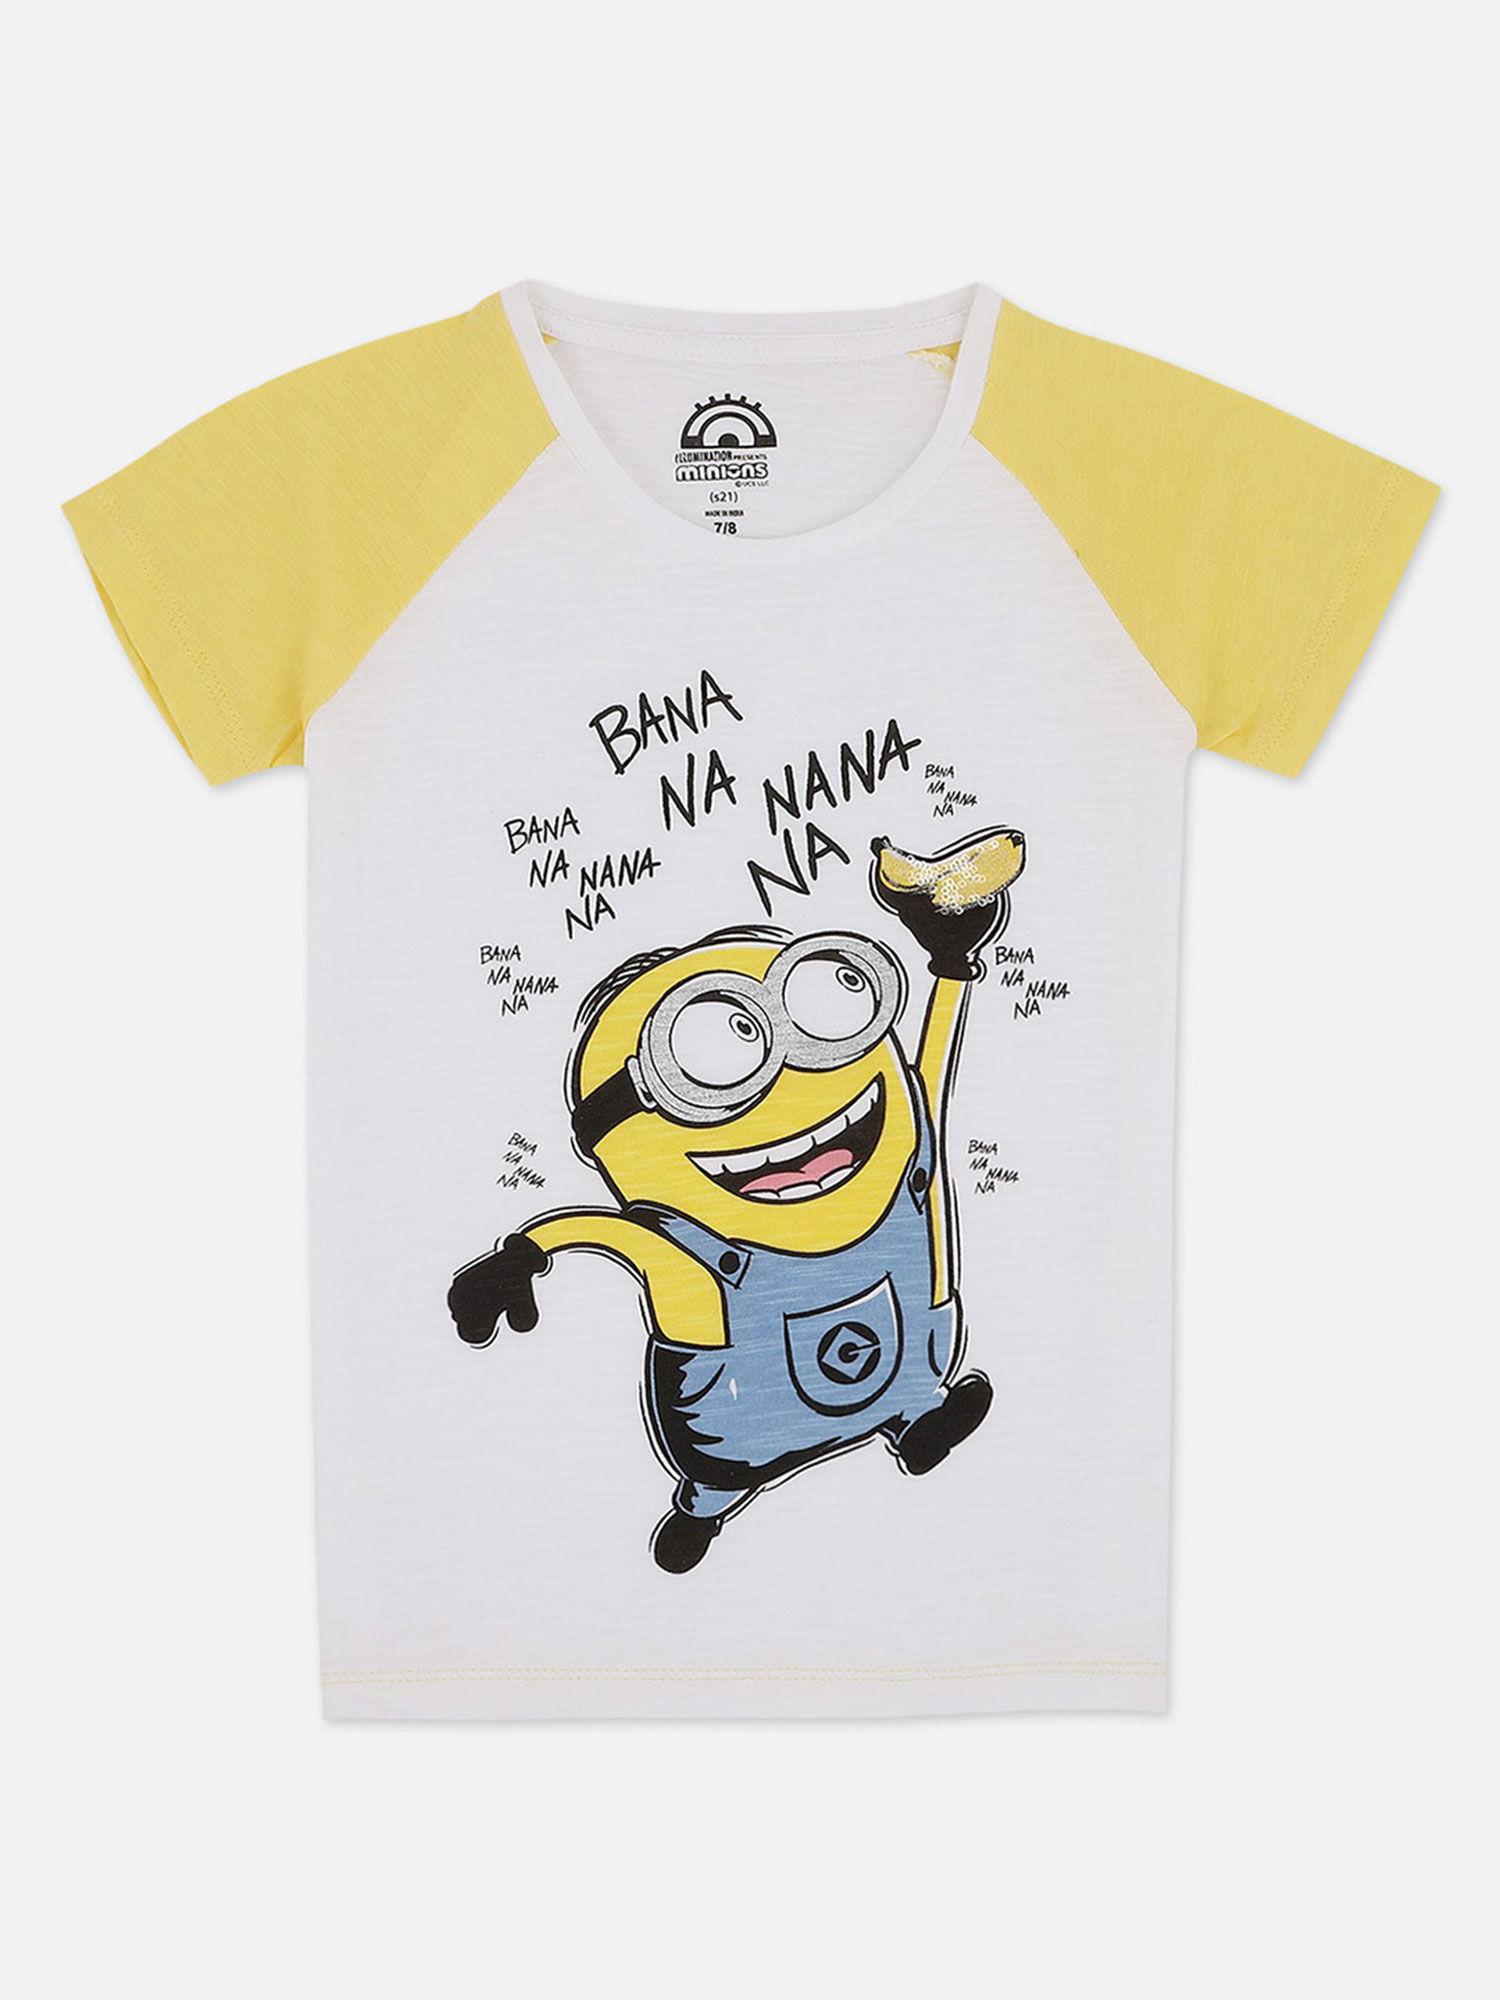 minions featured t-shirt for girls